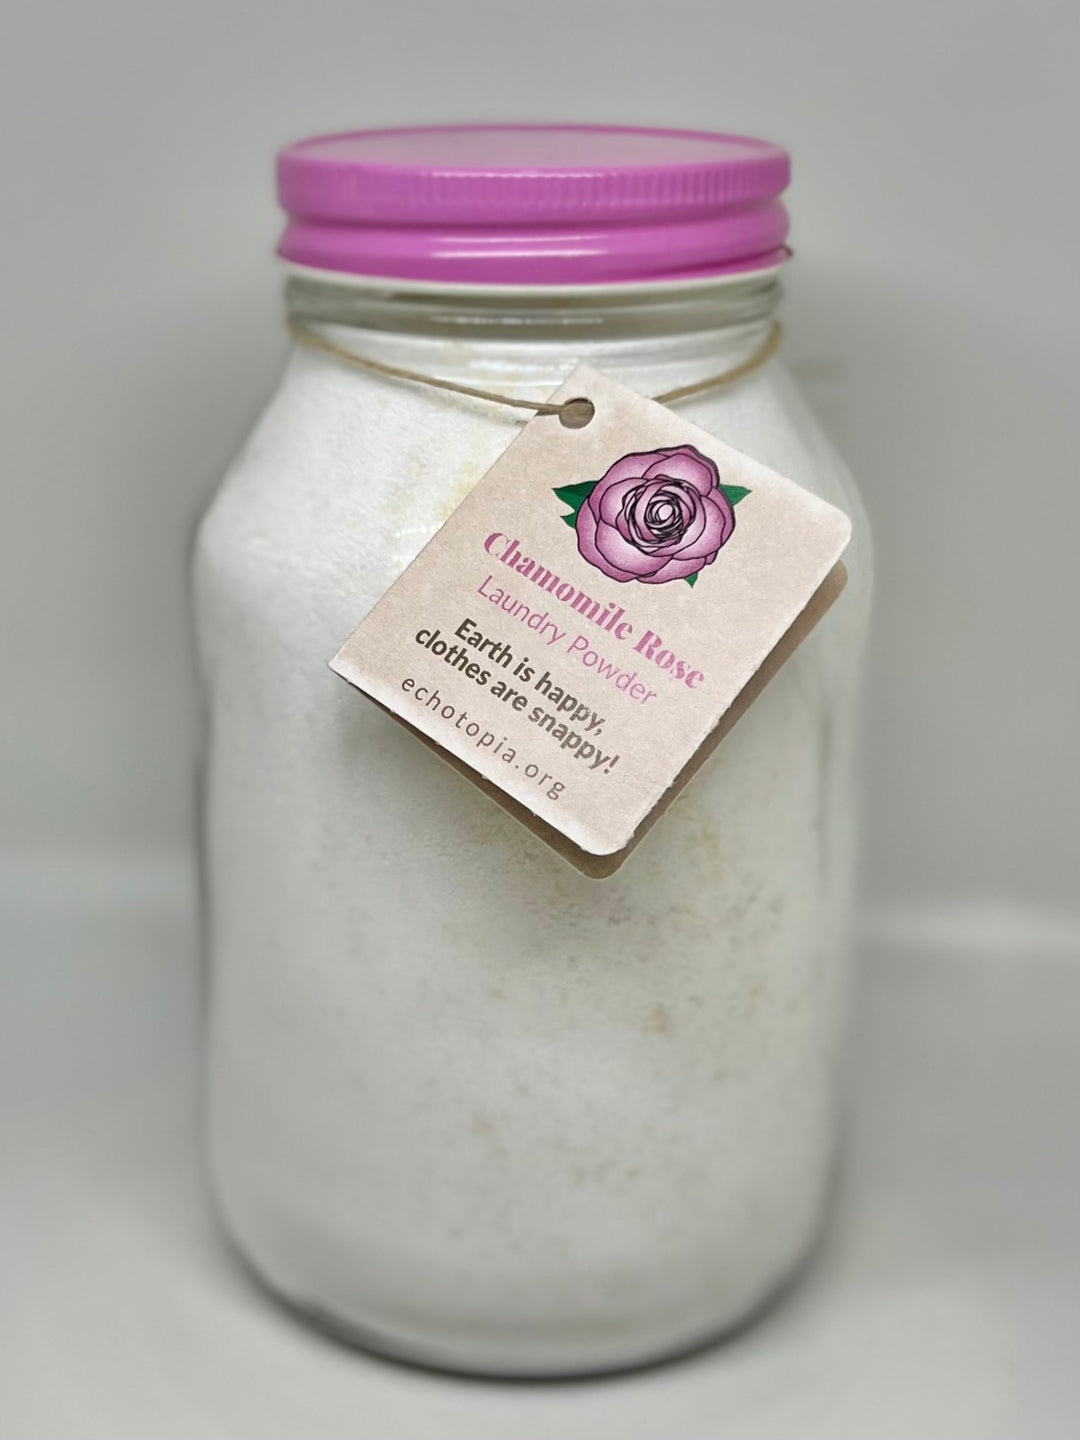 Chamomile Rose Laundry Powder. Made by Echotopia in Baltimore. Free of dangerous chemicals, optical brighteners, phosphates or fragrances.